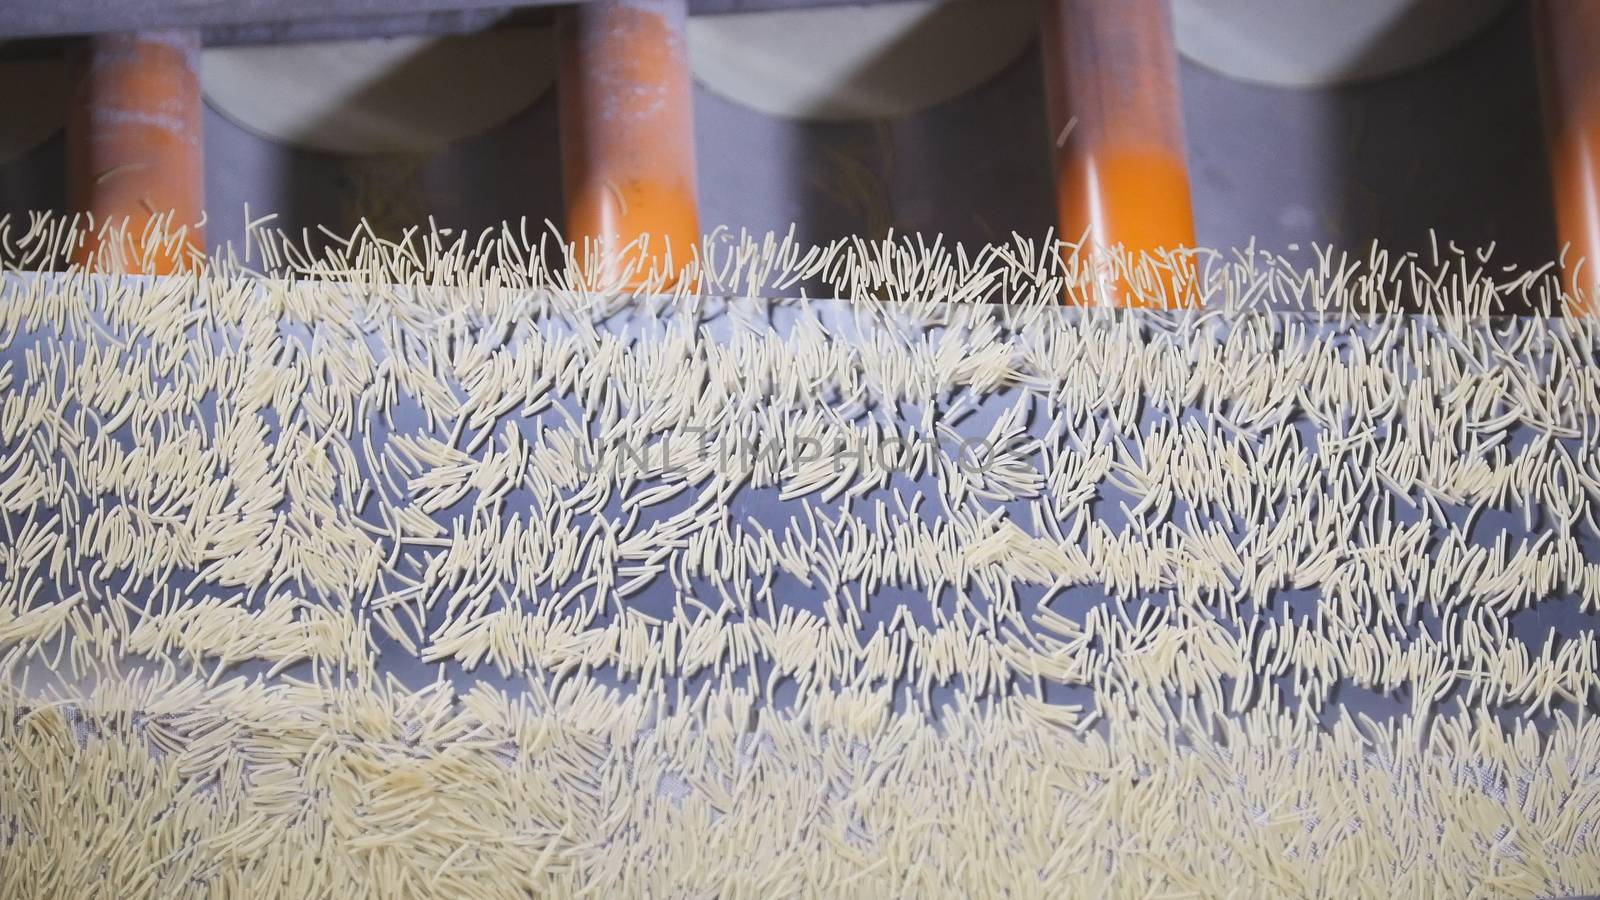 Macaroni product rolling on a conveyor belt in a pasta factory, close up